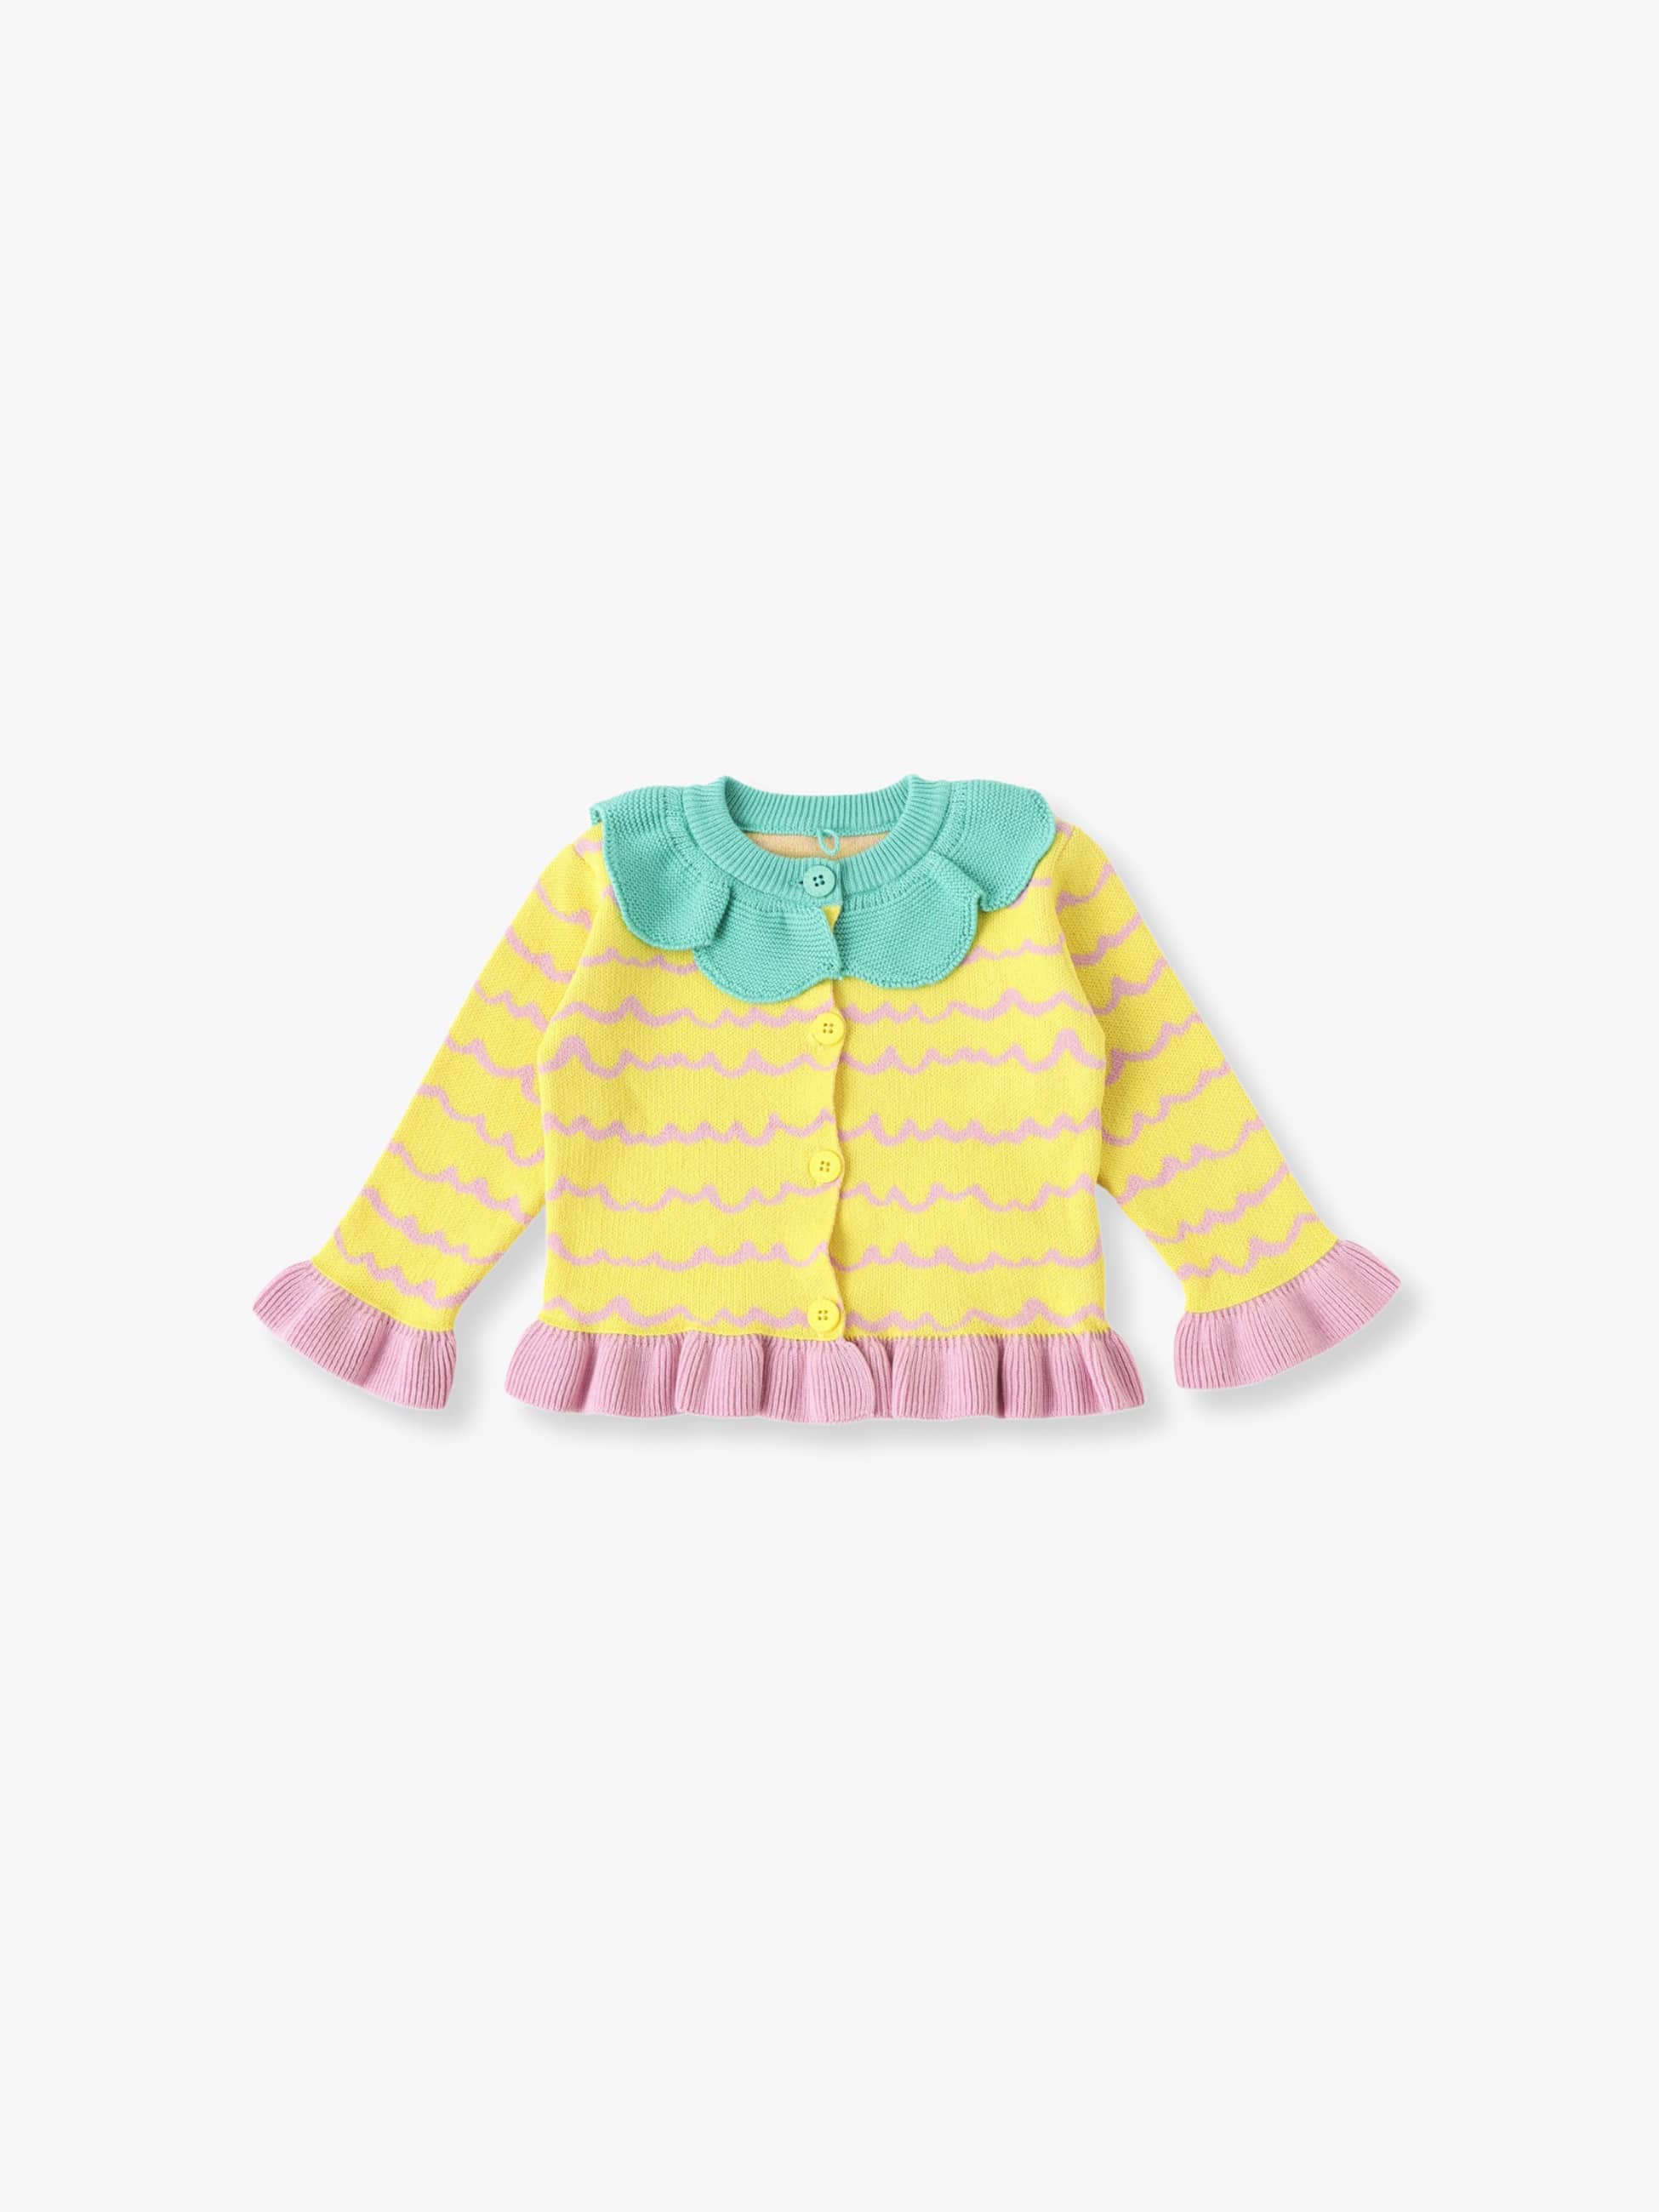 Pineapple Cardigan (12-24month) 詳細画像 other 1